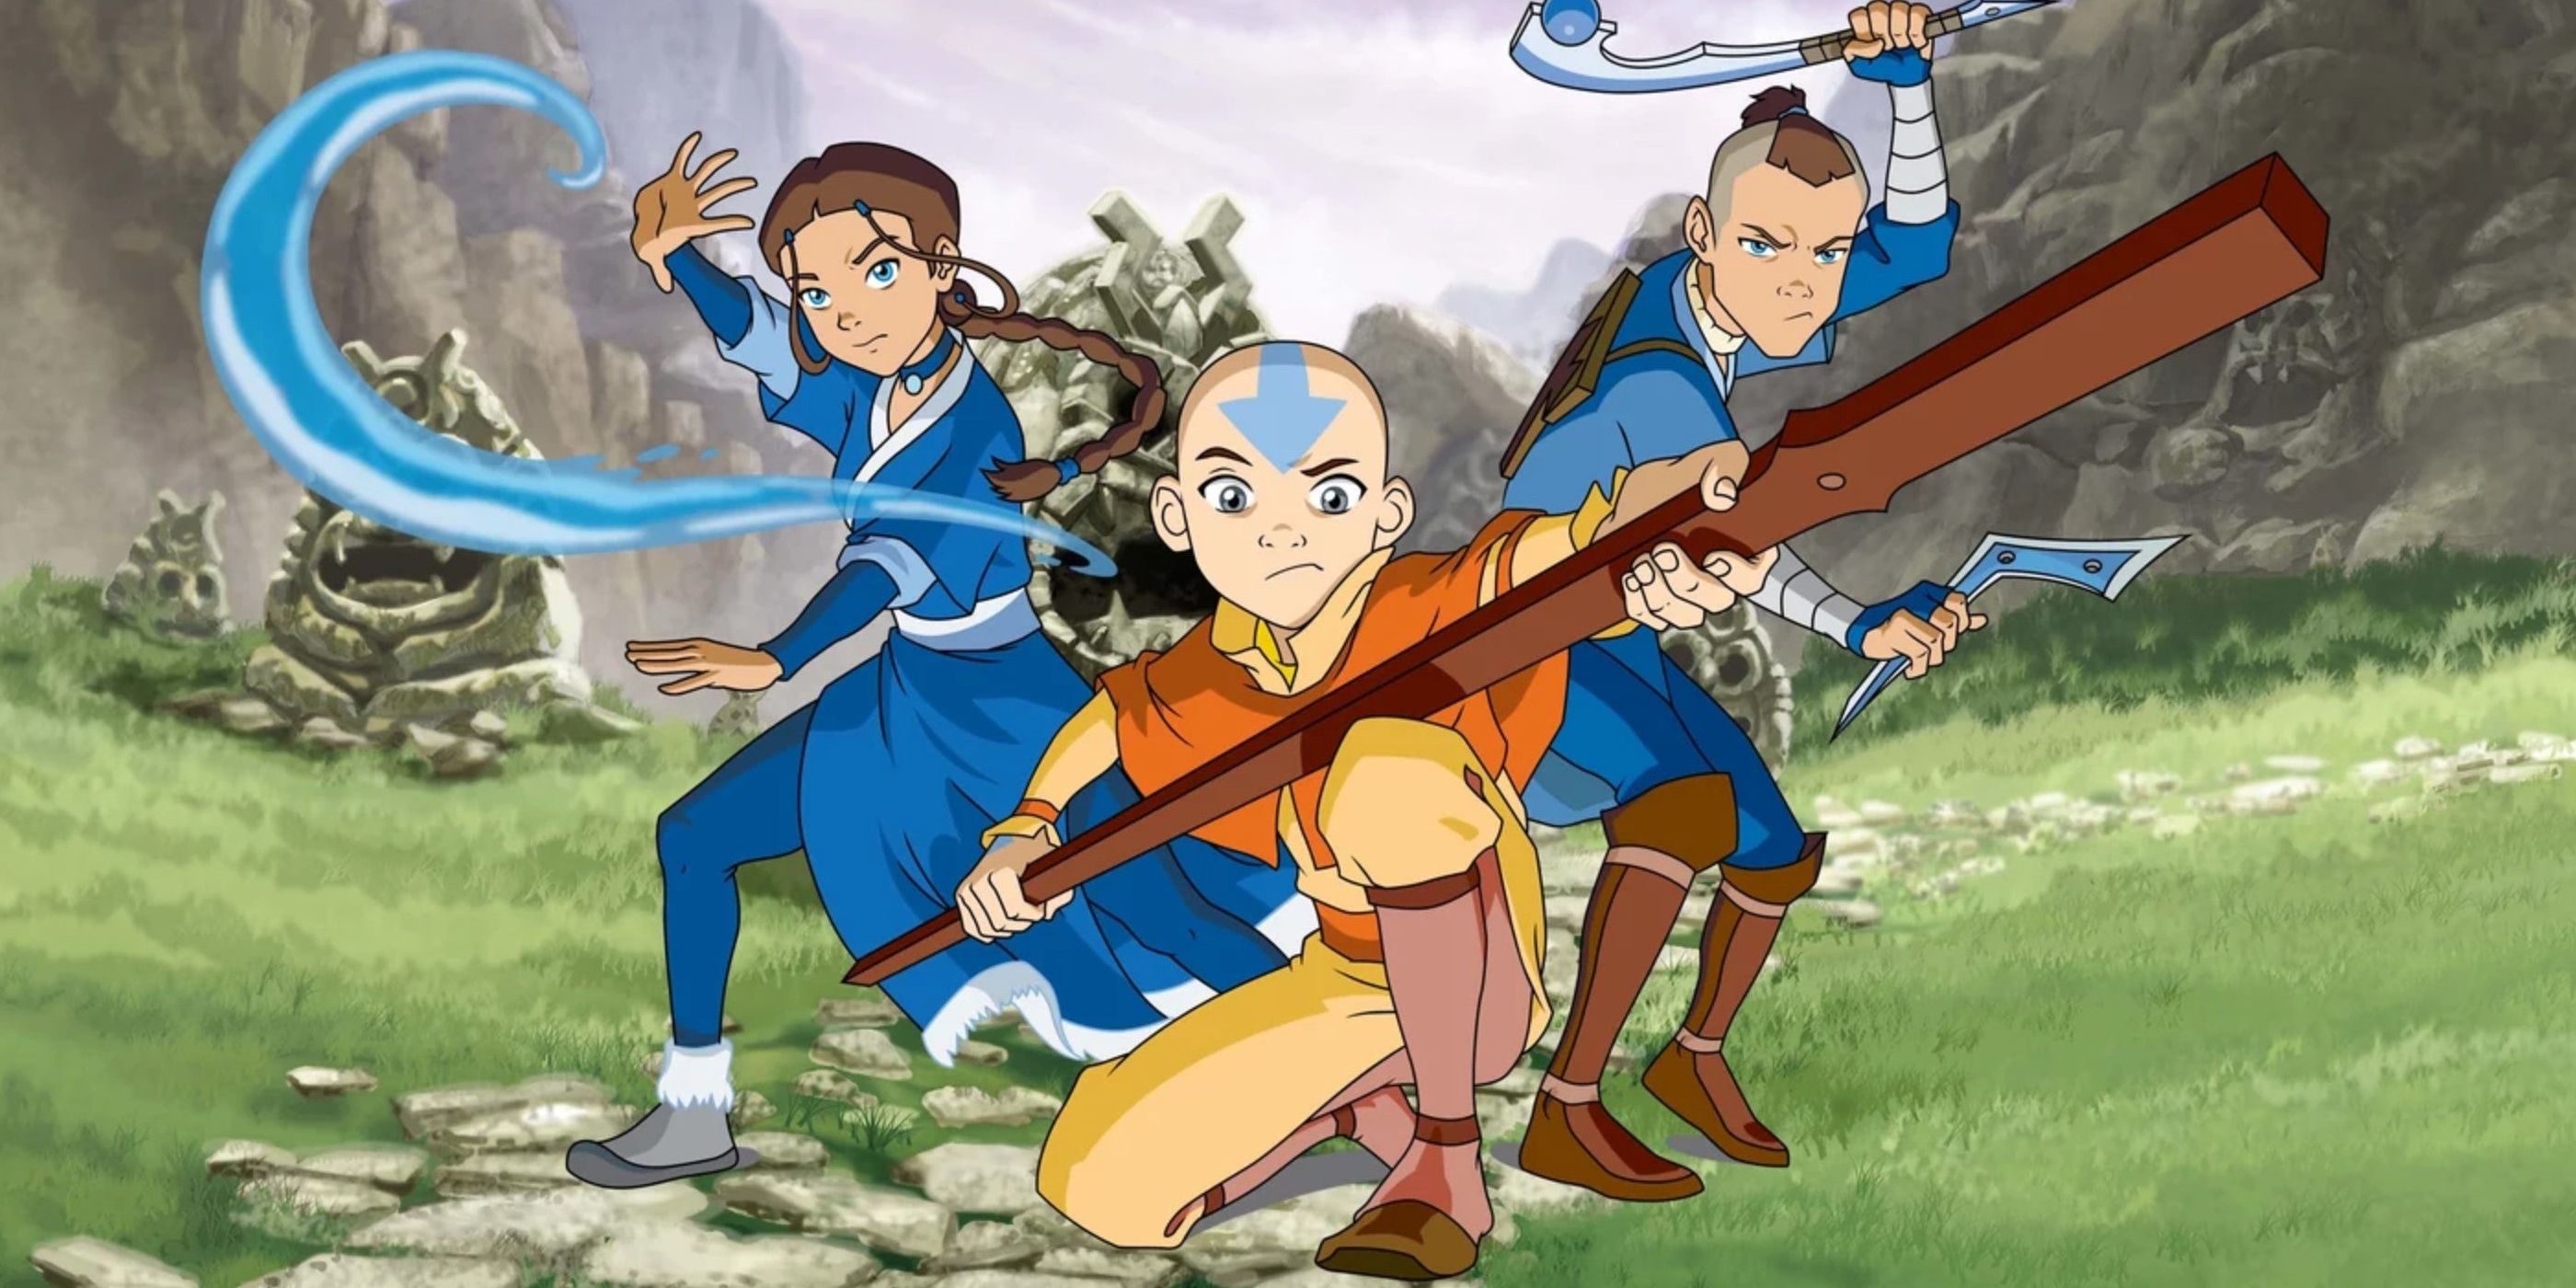 New Projects Based On 'Avatar: The Last Airbender' Coming From Series